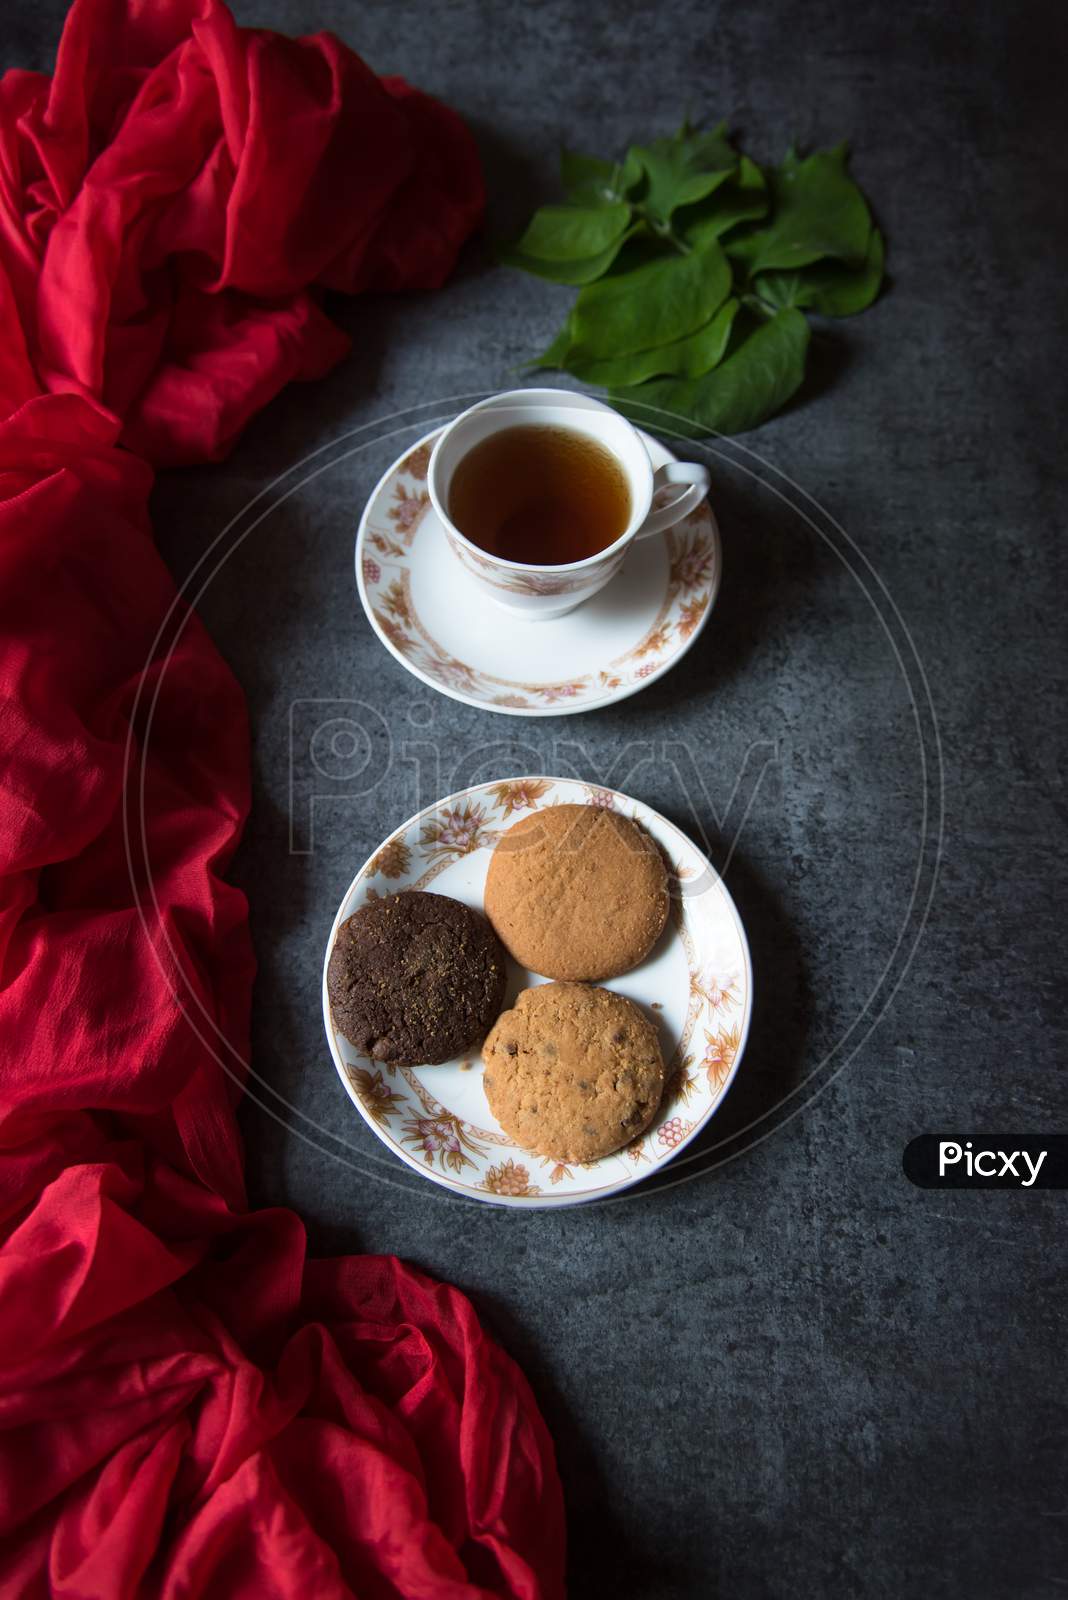 Top view of a cup of tea and a plate of cookies on a background